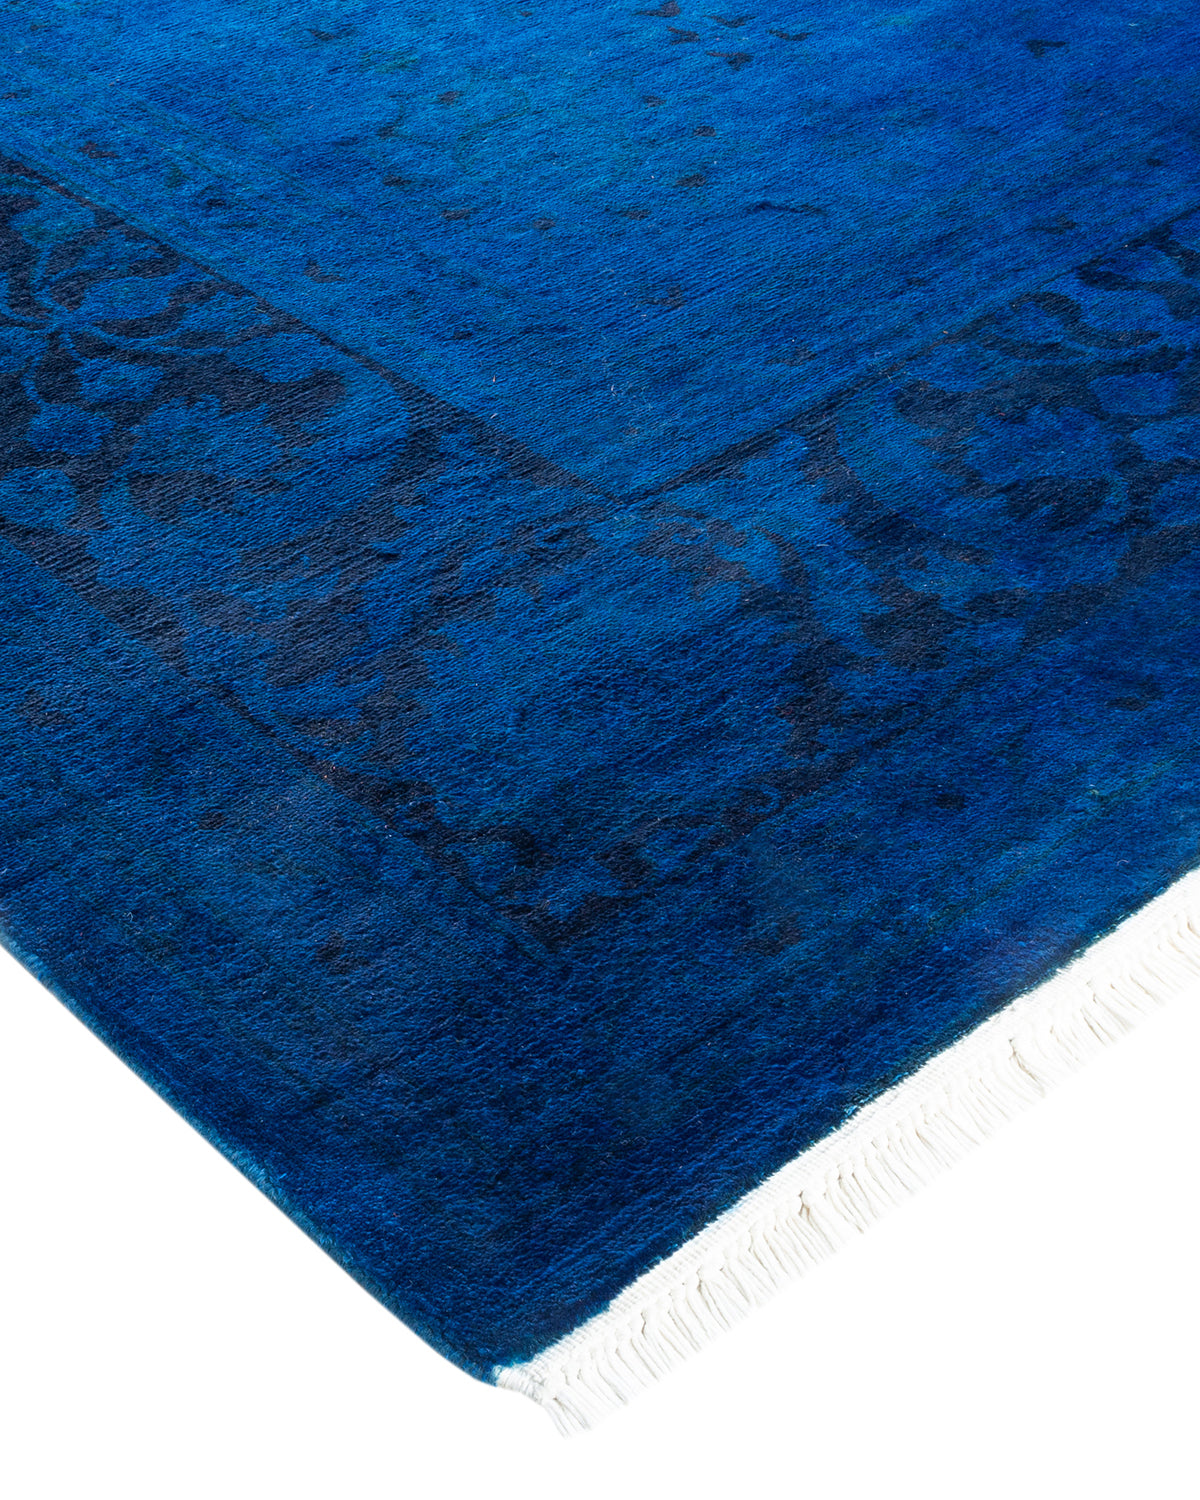 Modern Overdyed Blue Wool Area Rug <br> 9'0 x 12'0